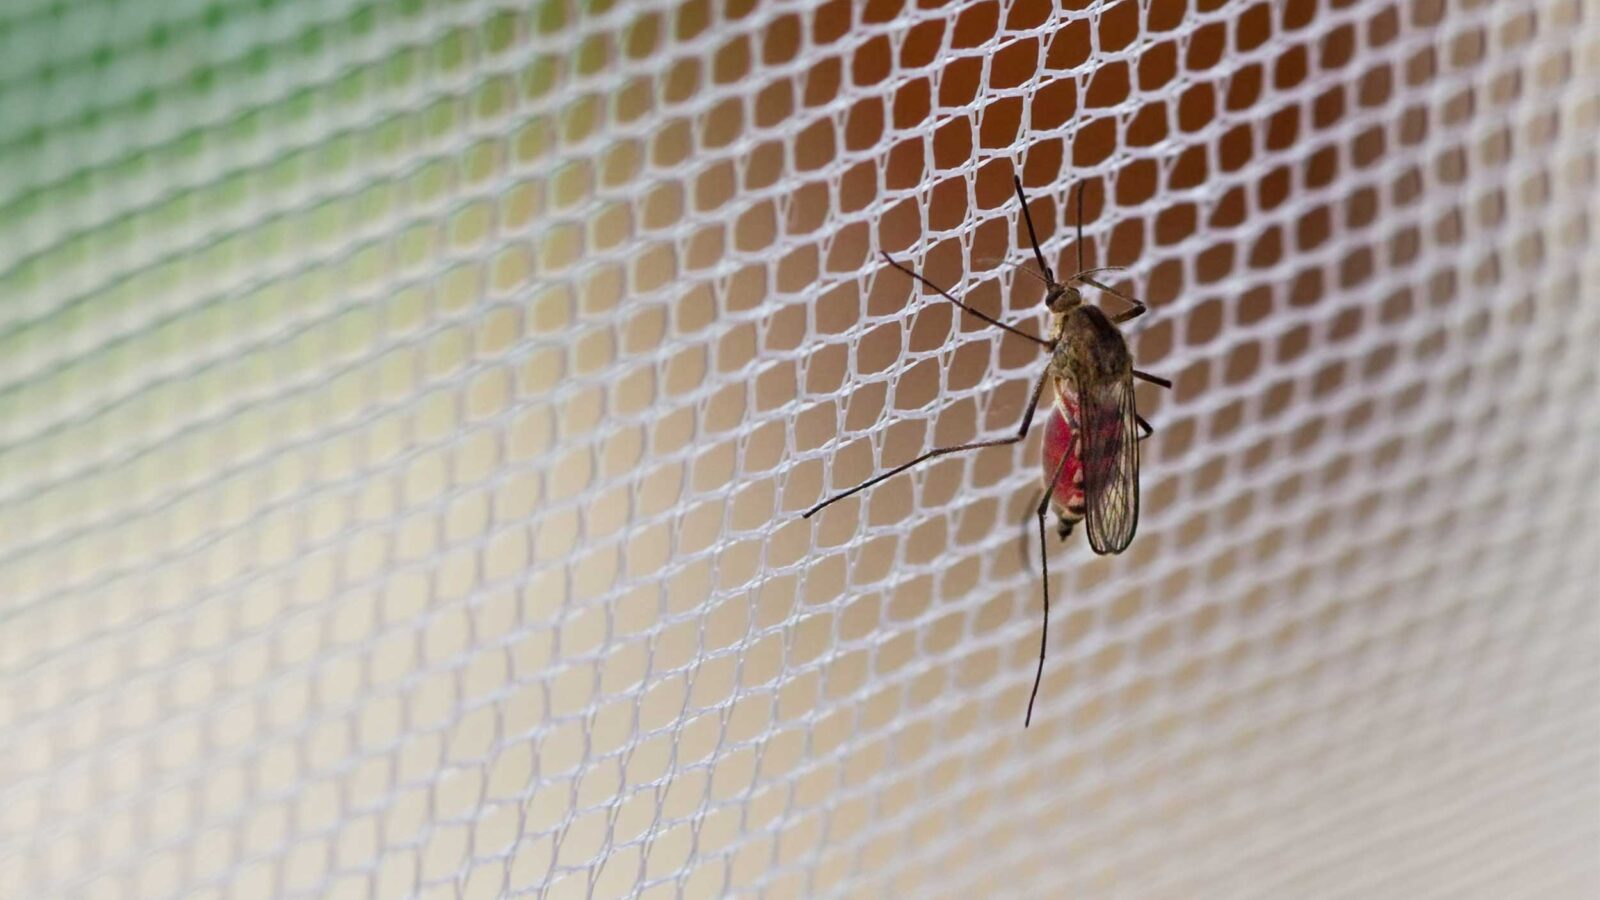 FIGHTING MALARIA WITH EFFECTIVE ALTRUISM